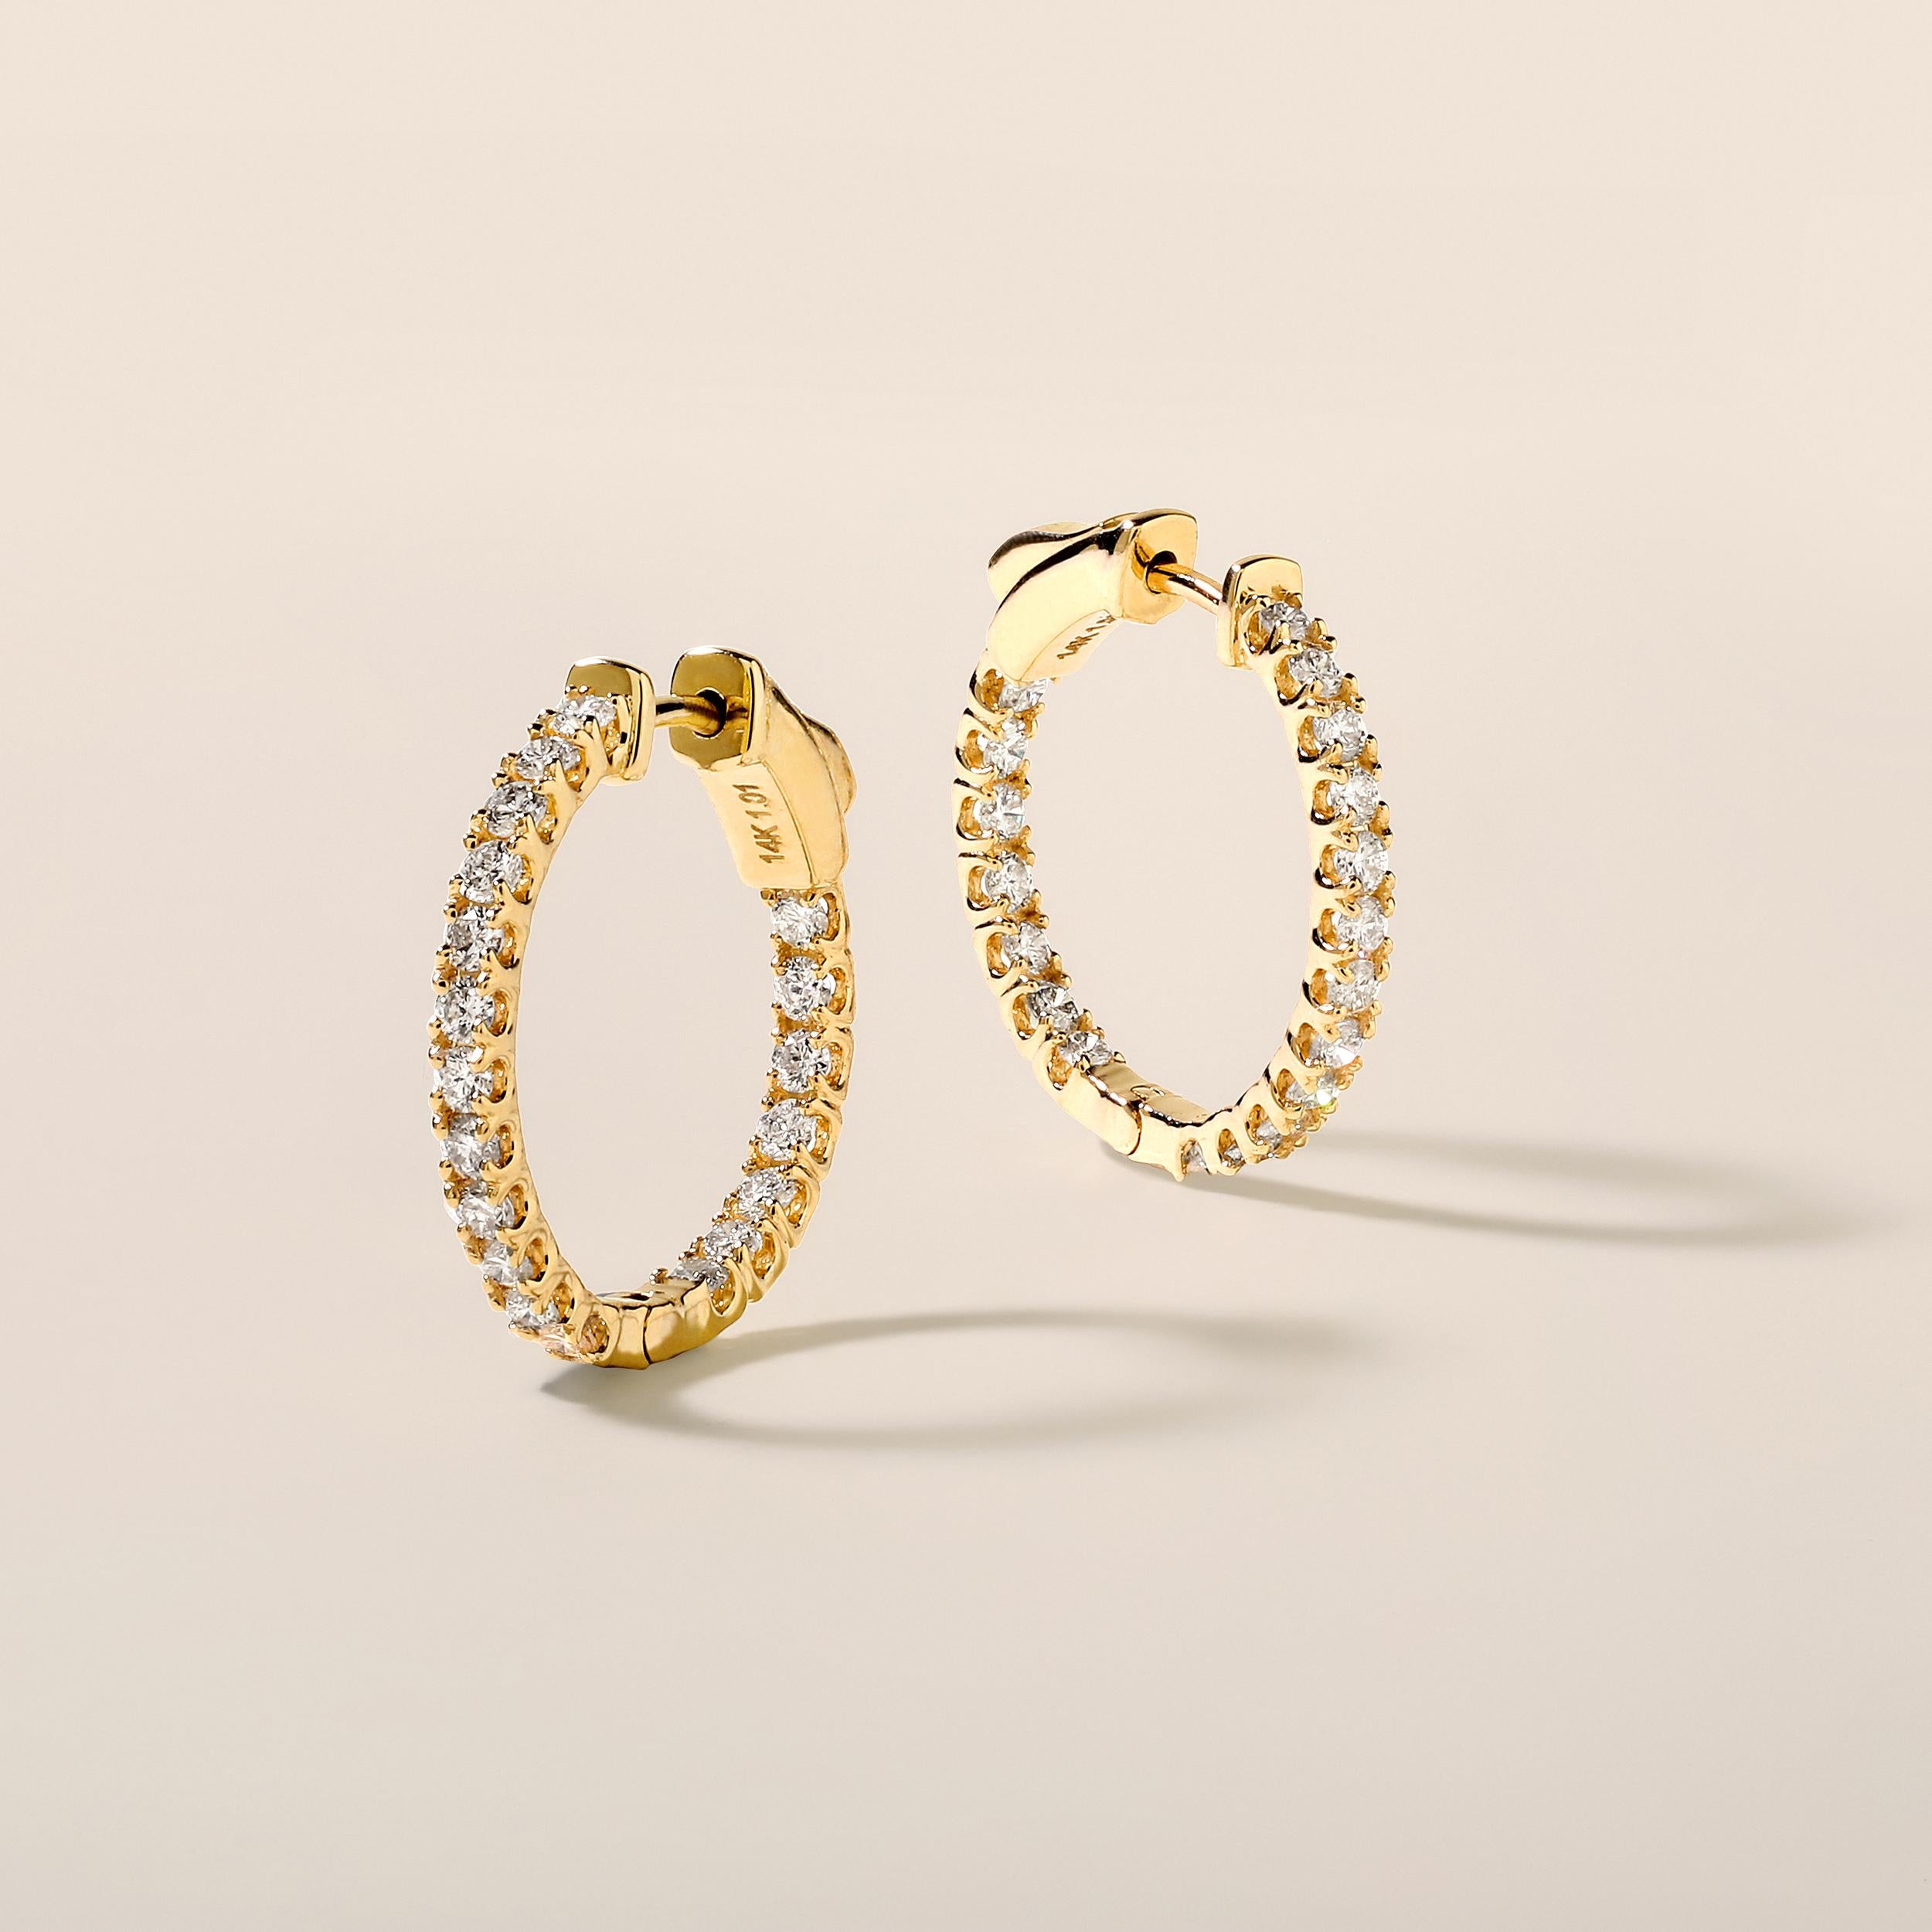 Crafted in 3.91 grams of 14K Yellow Gold, the earrings contain 38 stones of Round Natural Diamonds with a total of 1.01 carat in G-H color and SI clarity.

CONTEMPORARY AND TIMELESS ESSENCE: Crafted in 14-karat/18-karat with 100% natural diamond and